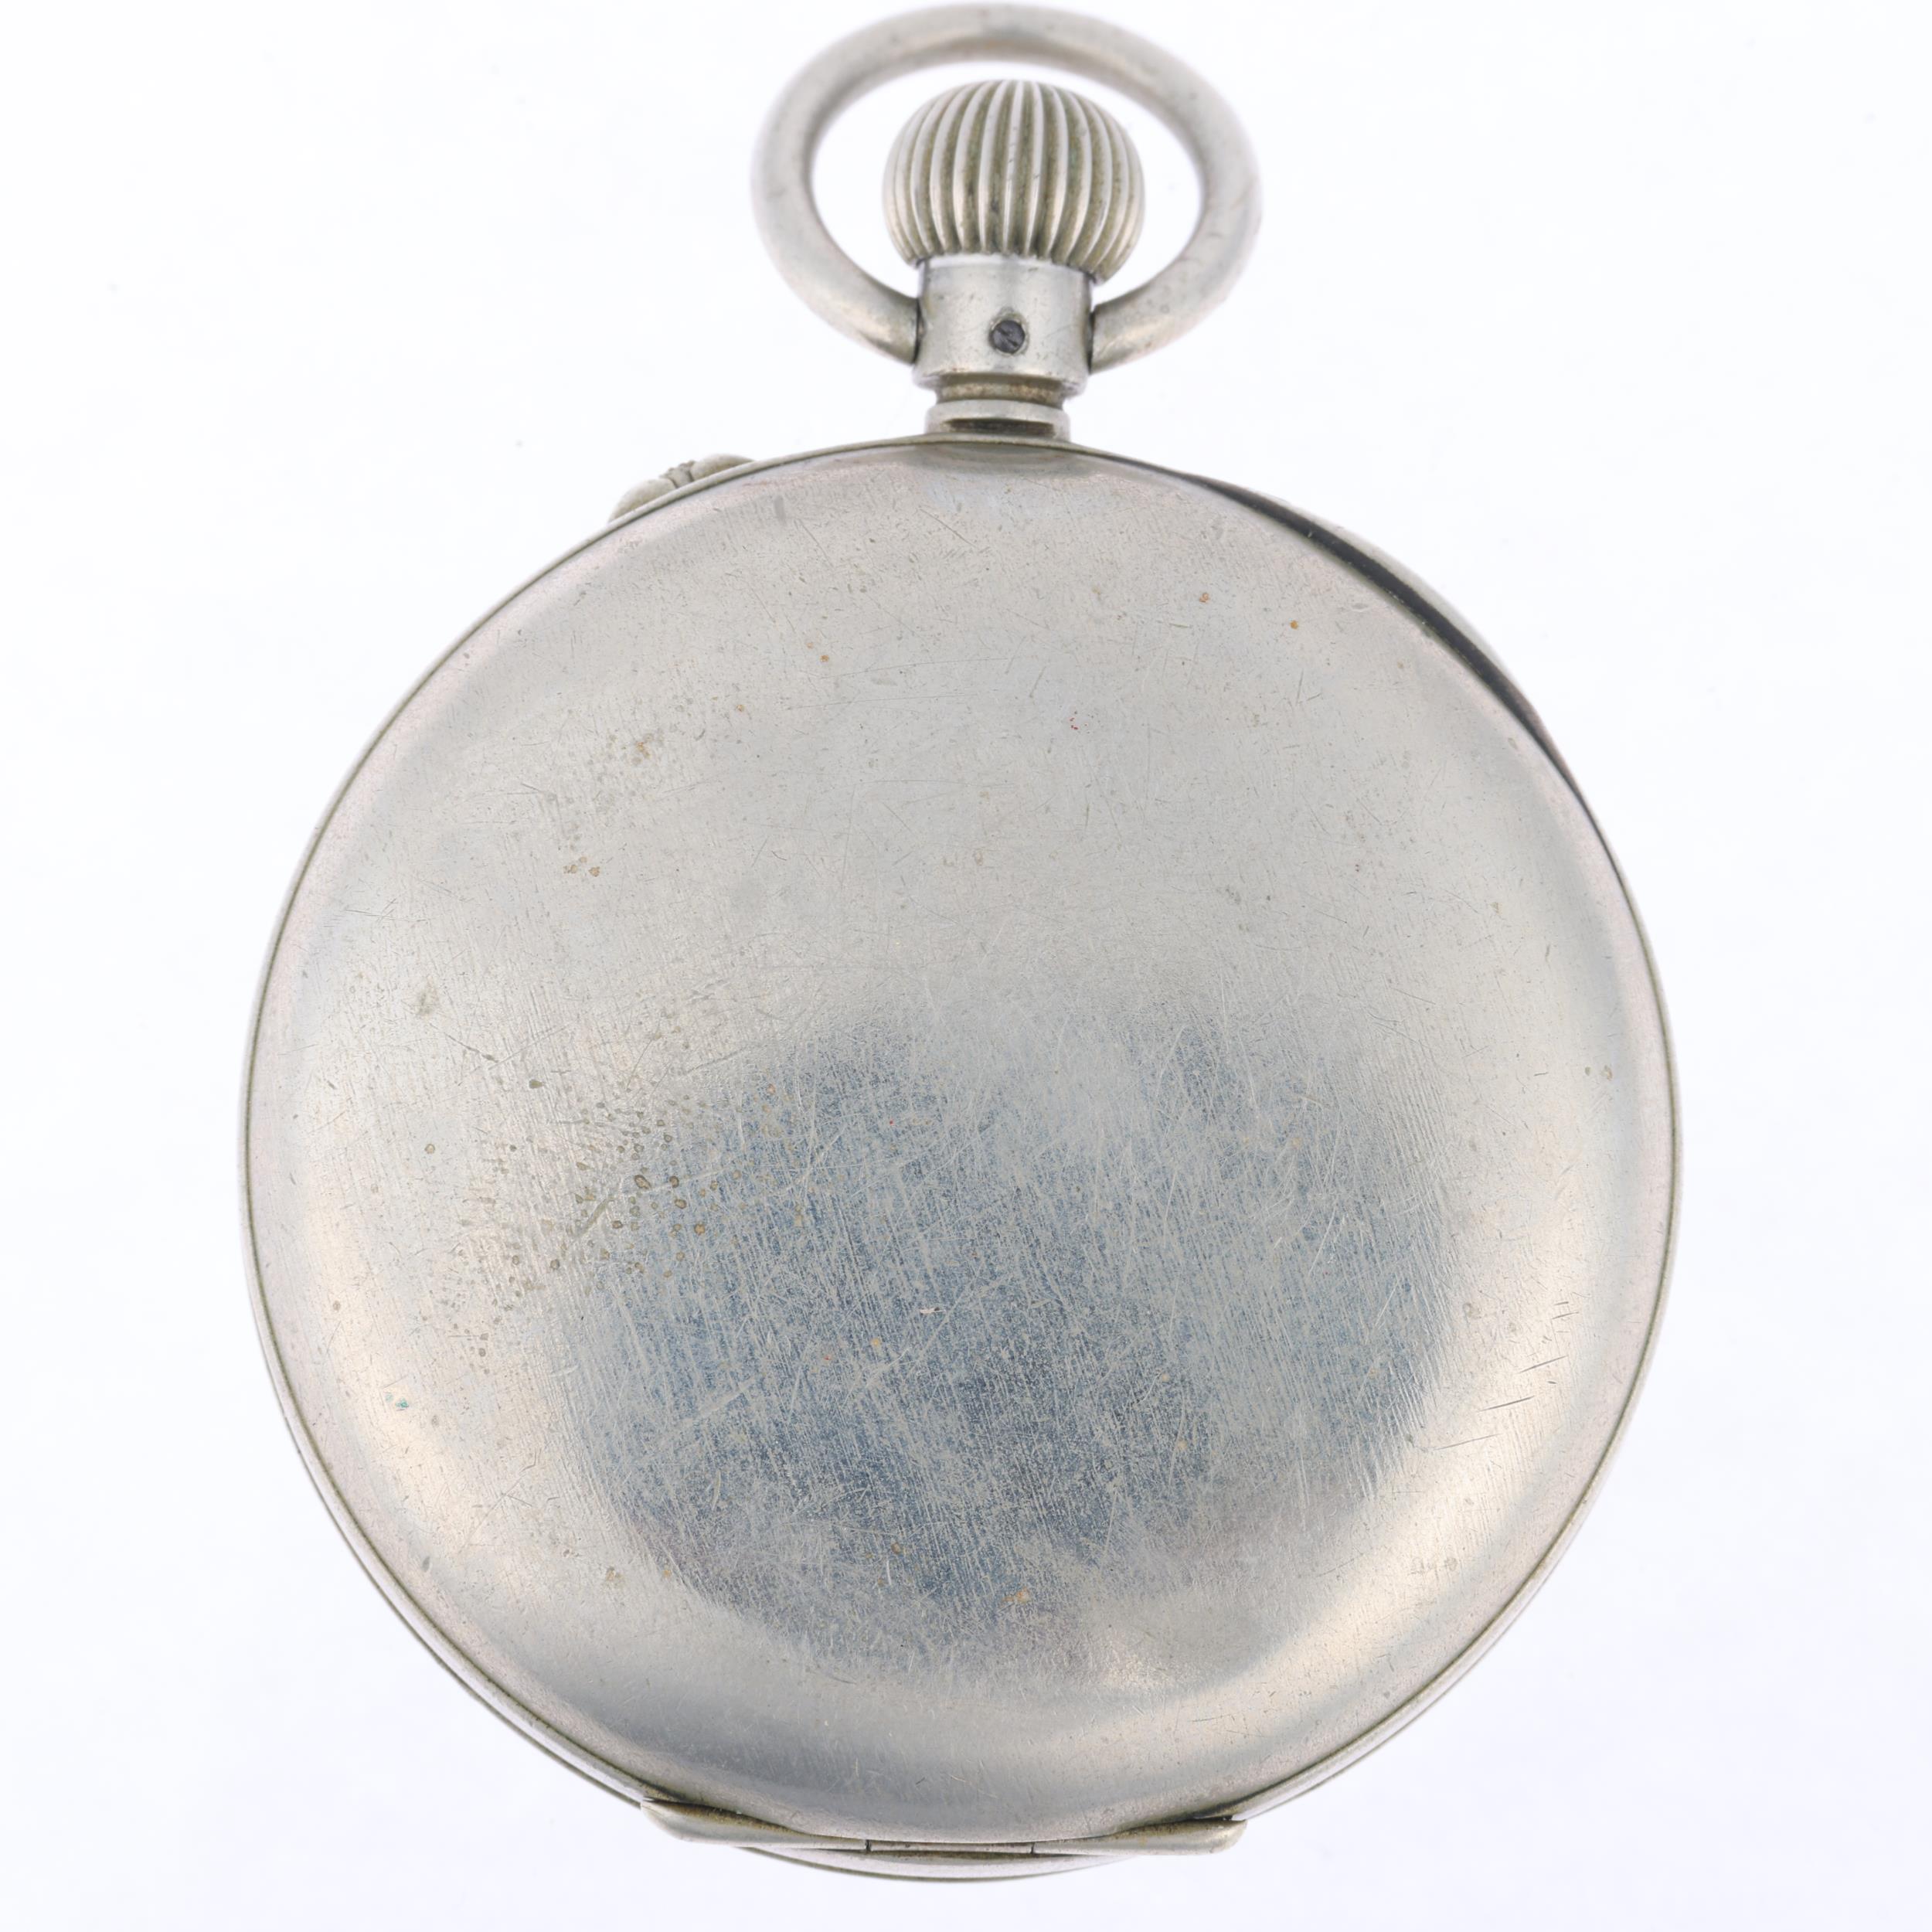 An early 20th century nickel open-face keyless chronograph pocket watch, white enamel dial with - Image 2 of 5